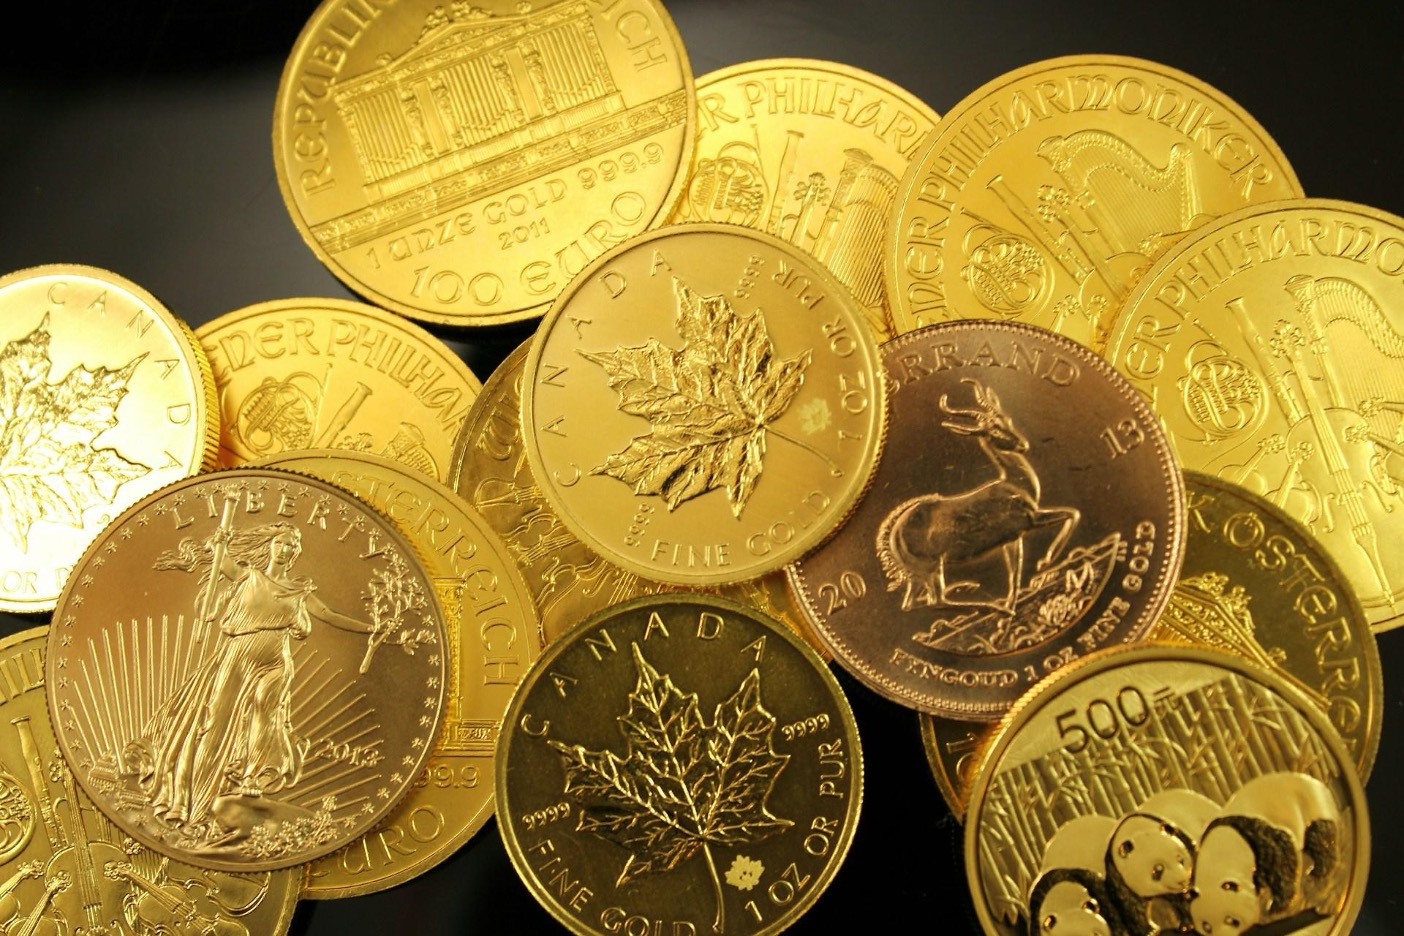 Buying Gold Bars vs. Coins: Advantages and Disadvantages